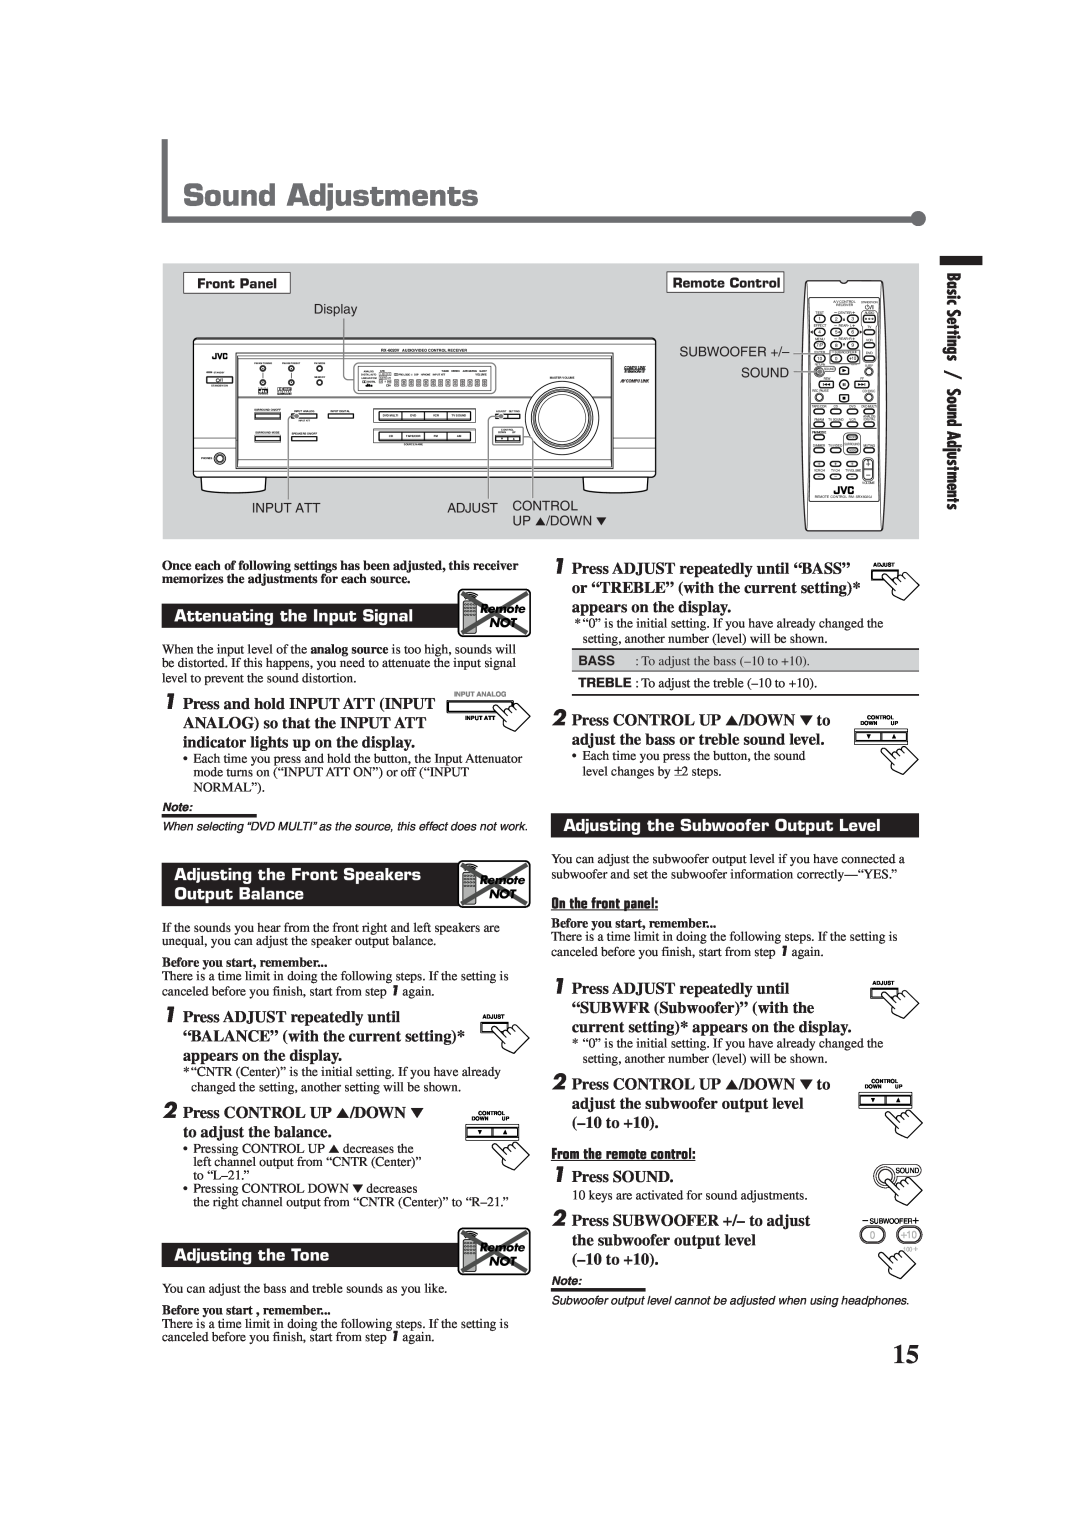 JVC RX-6020VBK manual Sound Adjustments, Attenuating the Input Signal, Adjusting the Front Speakers, Output Balance 